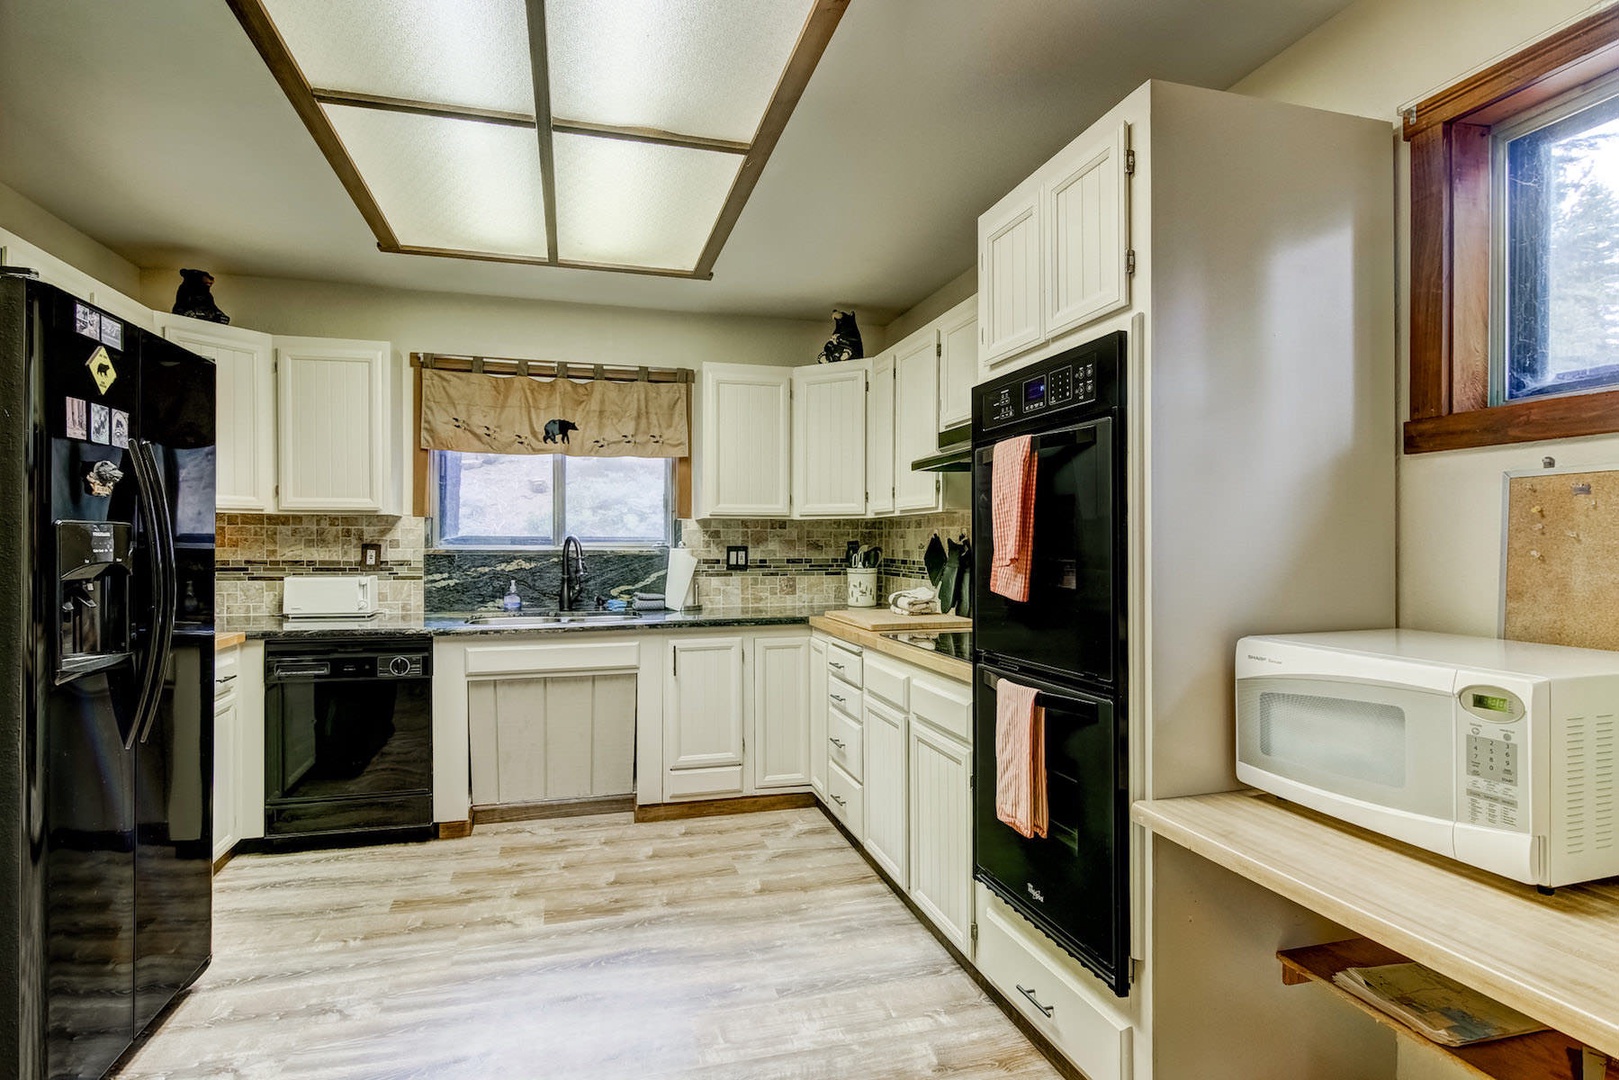 Full kitchen w/ toaster, drip coffee maker, slow cooker, blender, wine ware and more!